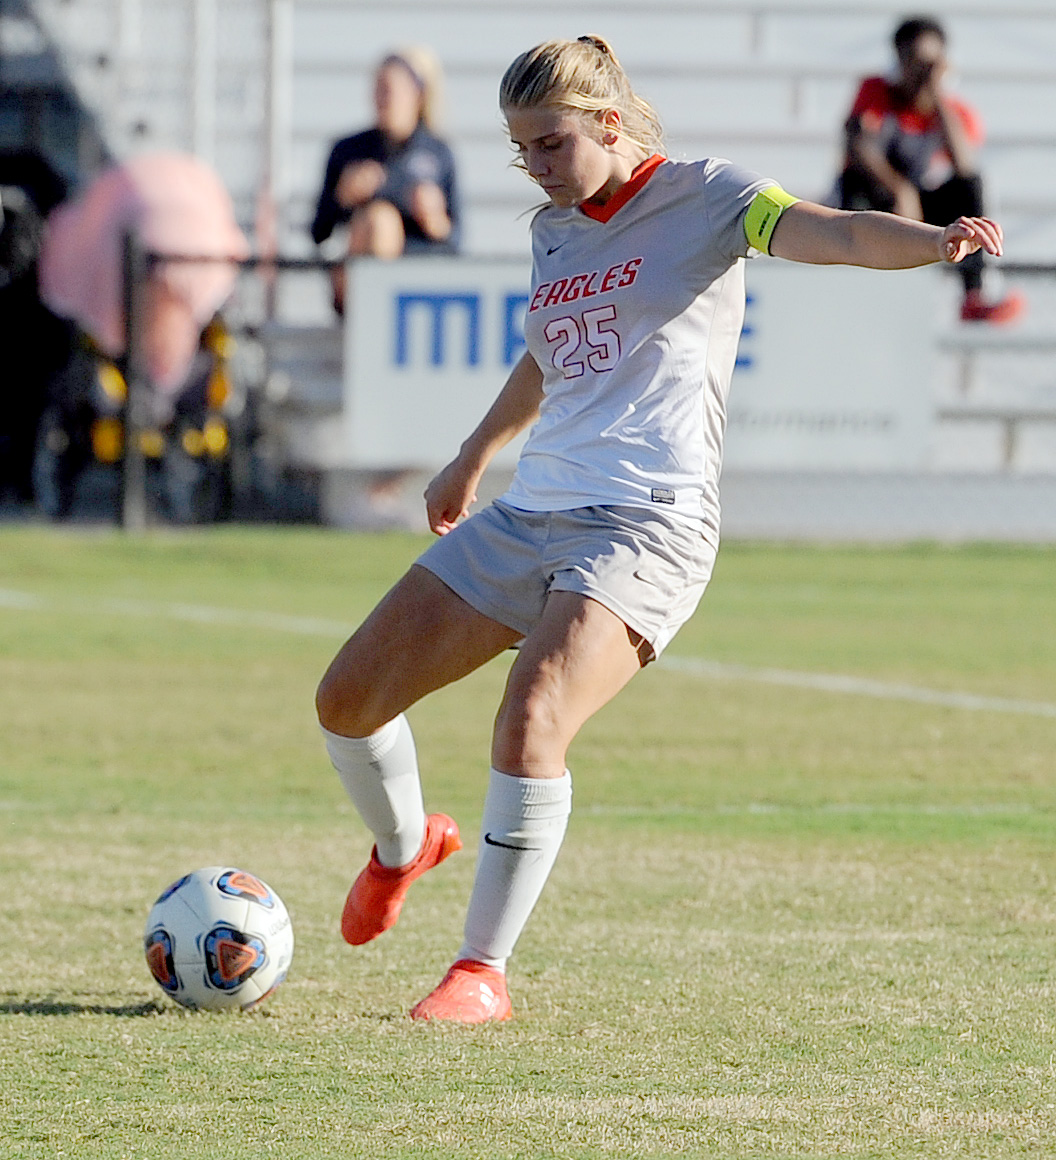 NSCAA Places Eagles at No. 14 in Most Recent Poll